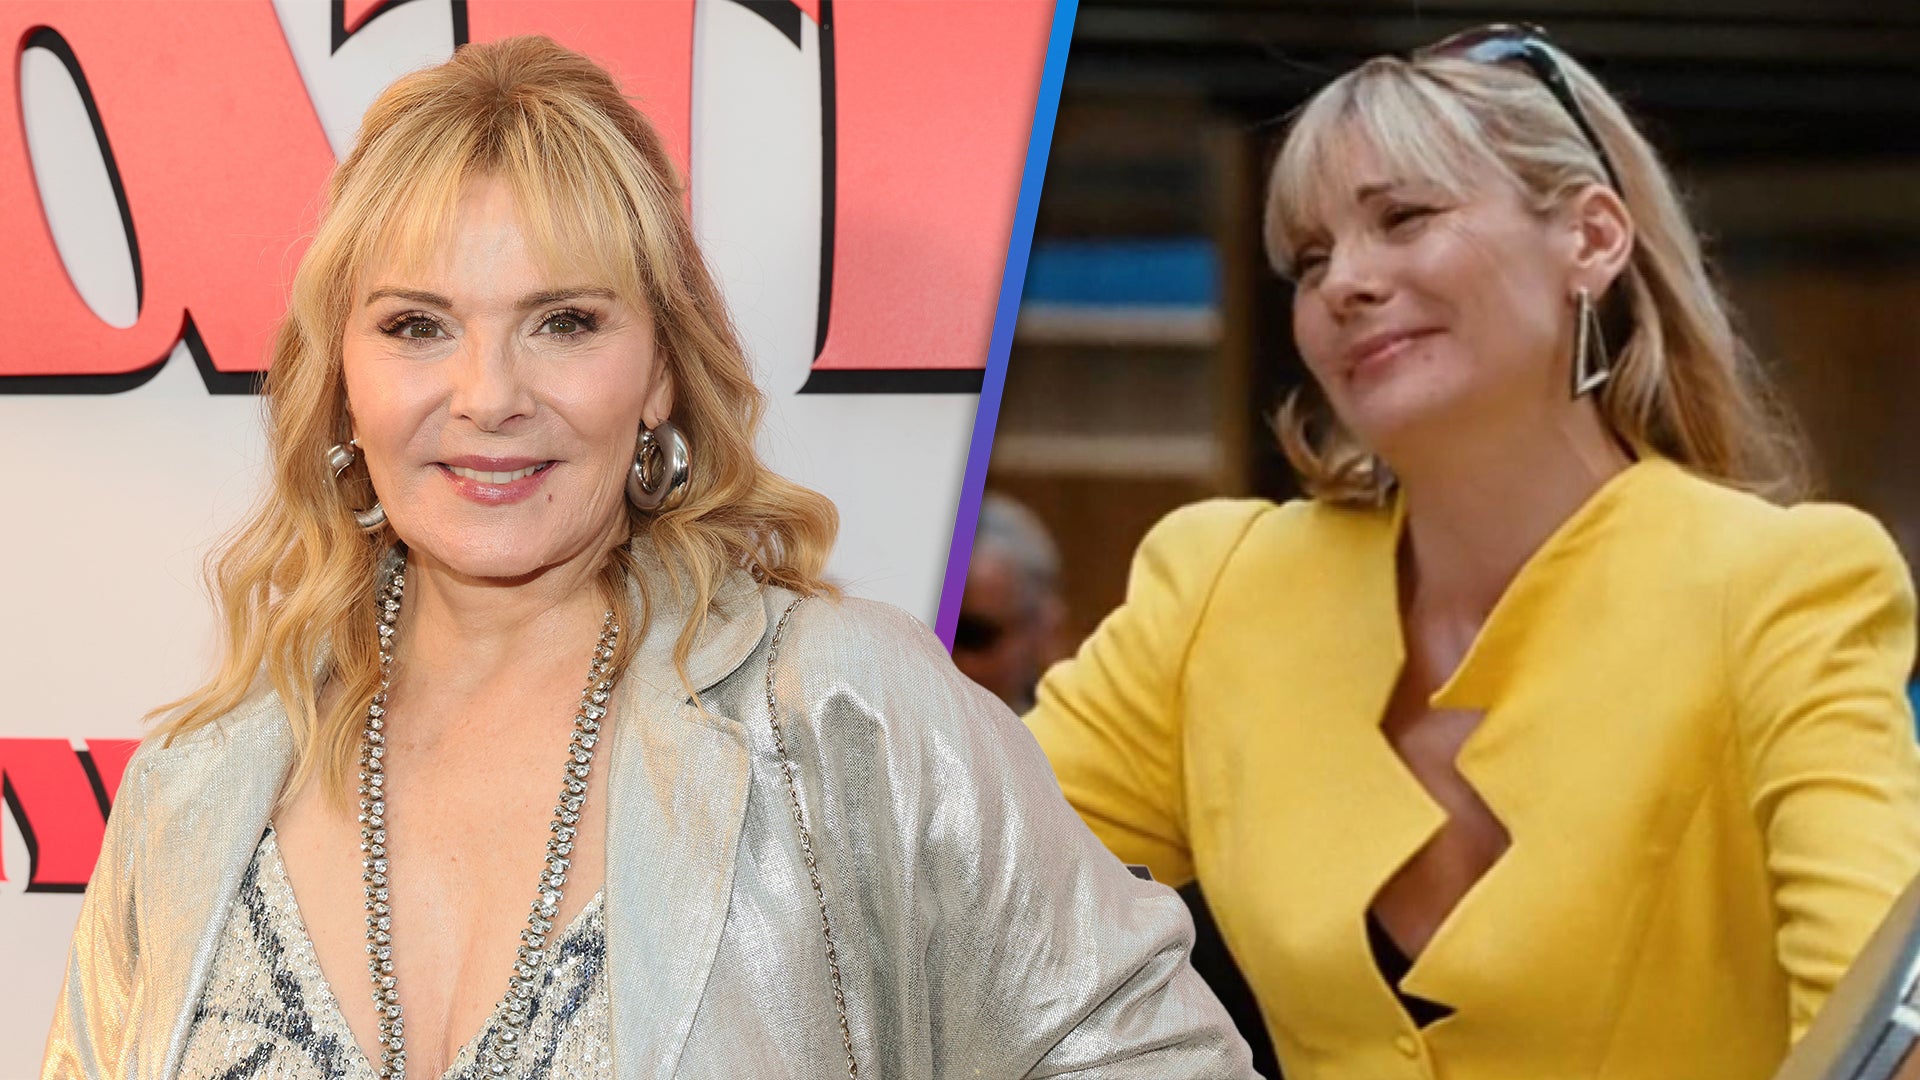 Kim Cattrall to Make Cameo in And Just Like That Season 2 as Samantha Jones pic pic